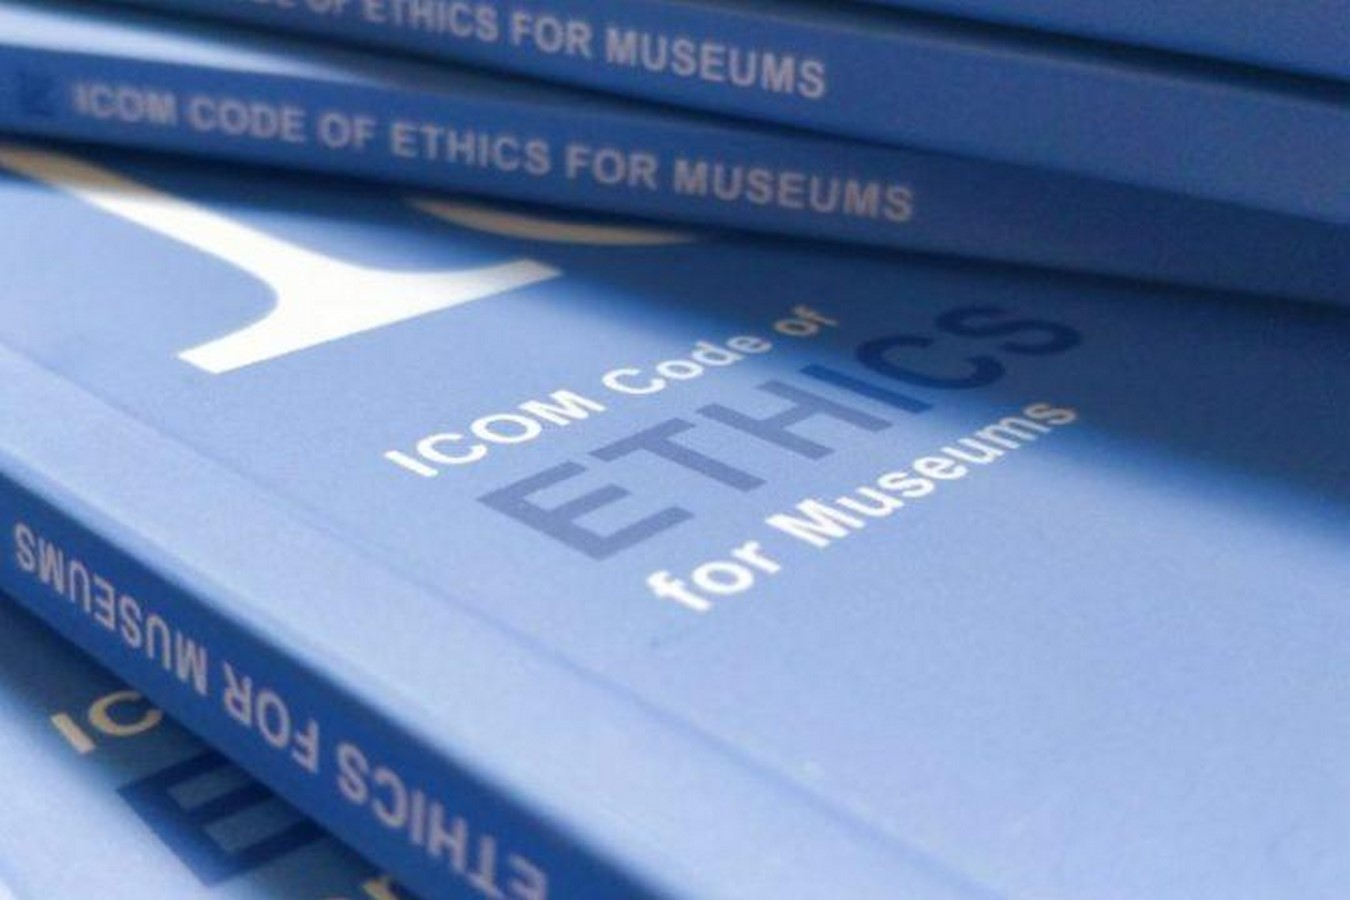 An overview of ICOM Code of Ethics for Museums